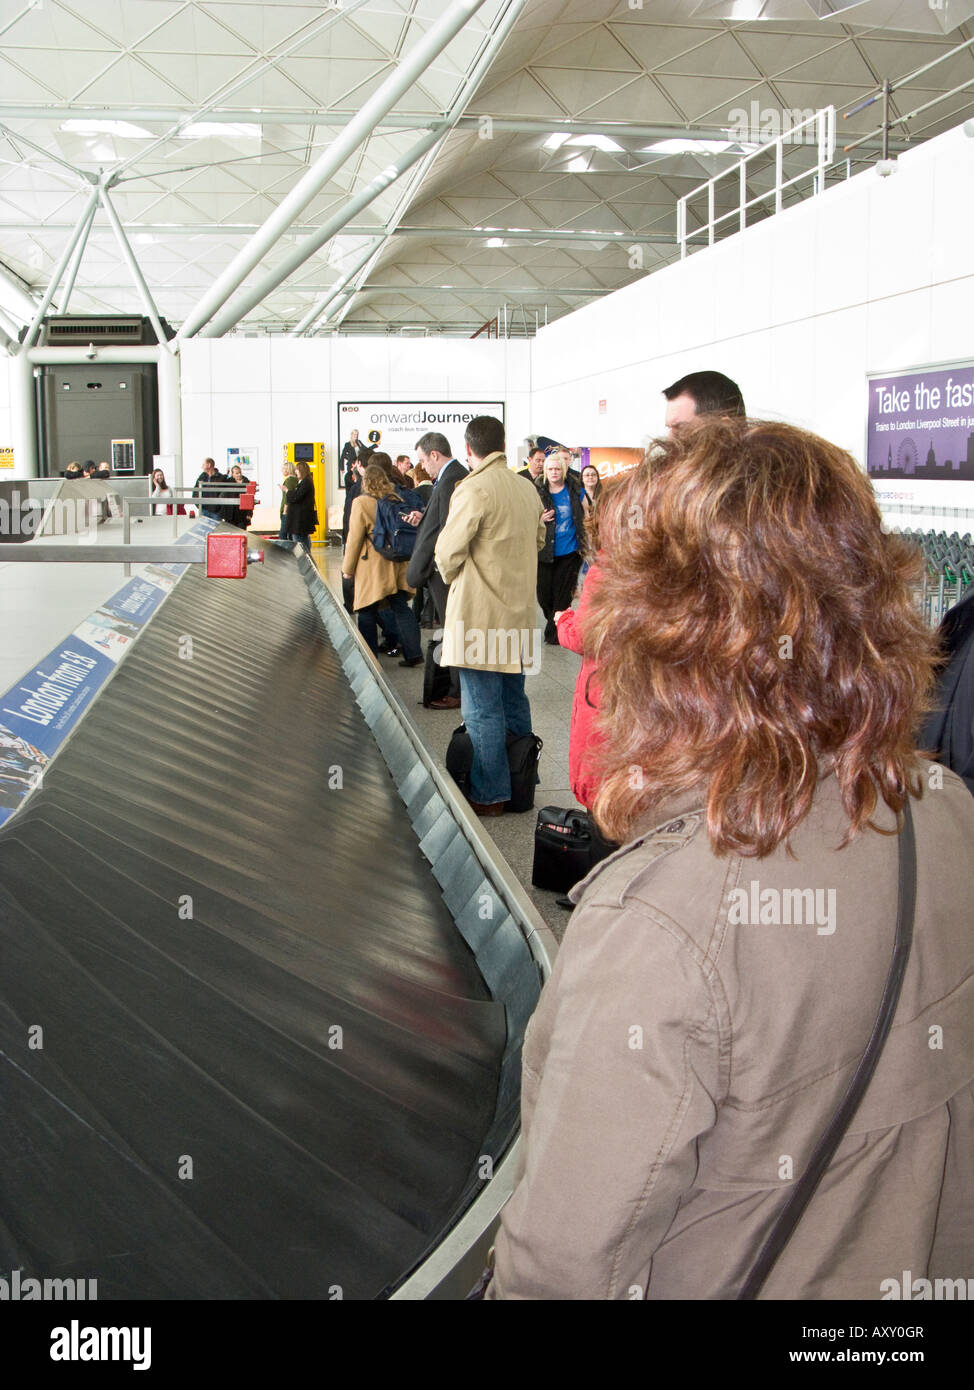 passengers waiting for luggage on EasyJet flight, Stansted airport, England, UK Stock Photo